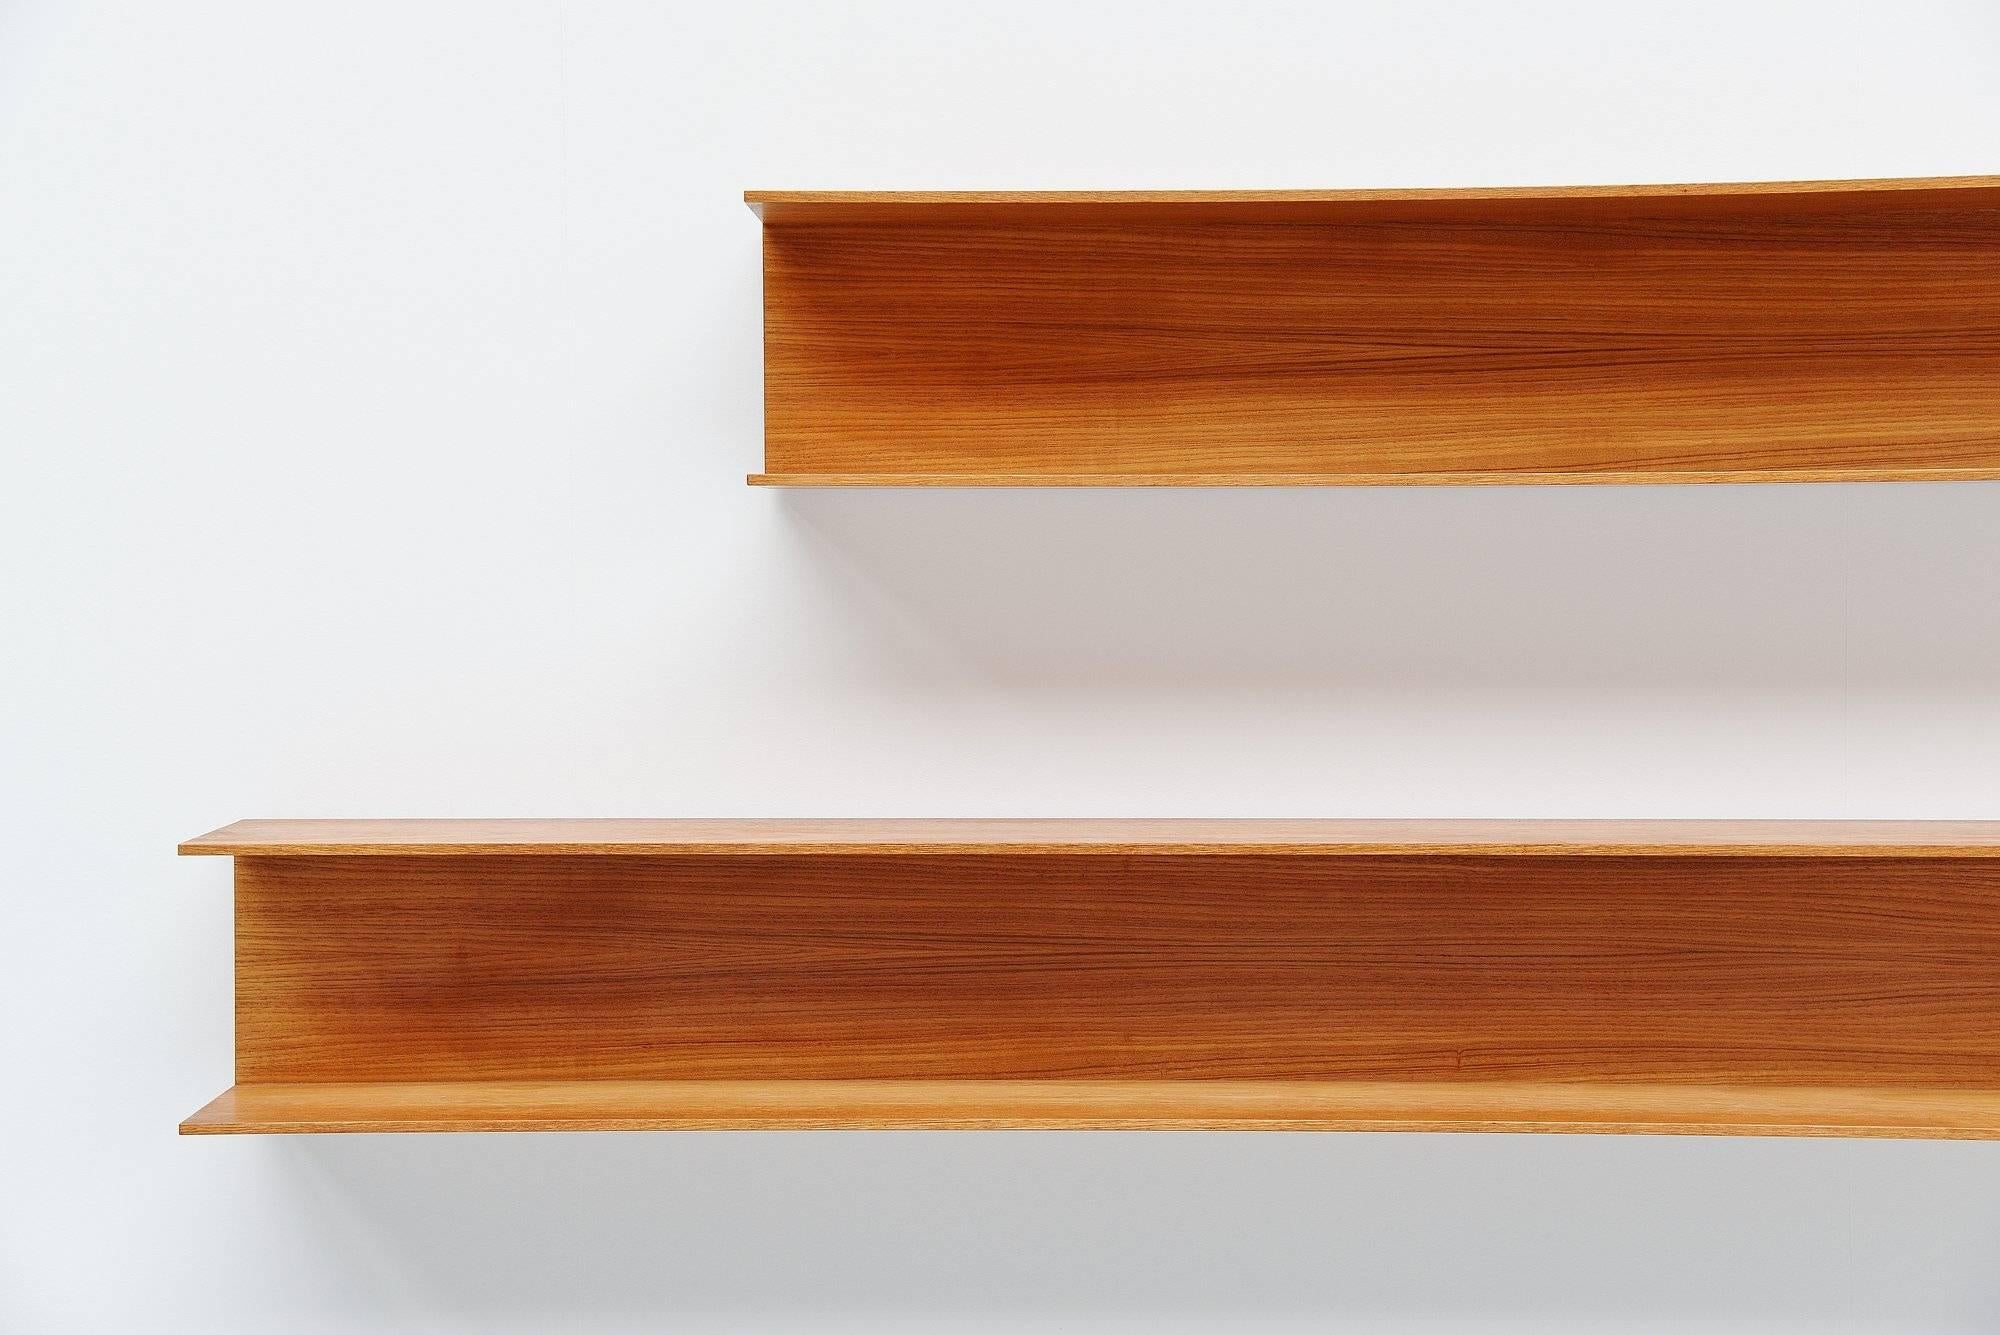 Very nice set of three large wall shelves designed by Walter Wirtz and manufactured by Wilhelm Renz, Germany, 1965. These shelves are made of teak wooden veneer and are easy to wall hang using only 2 screws per shelve. Very nice modernist set of